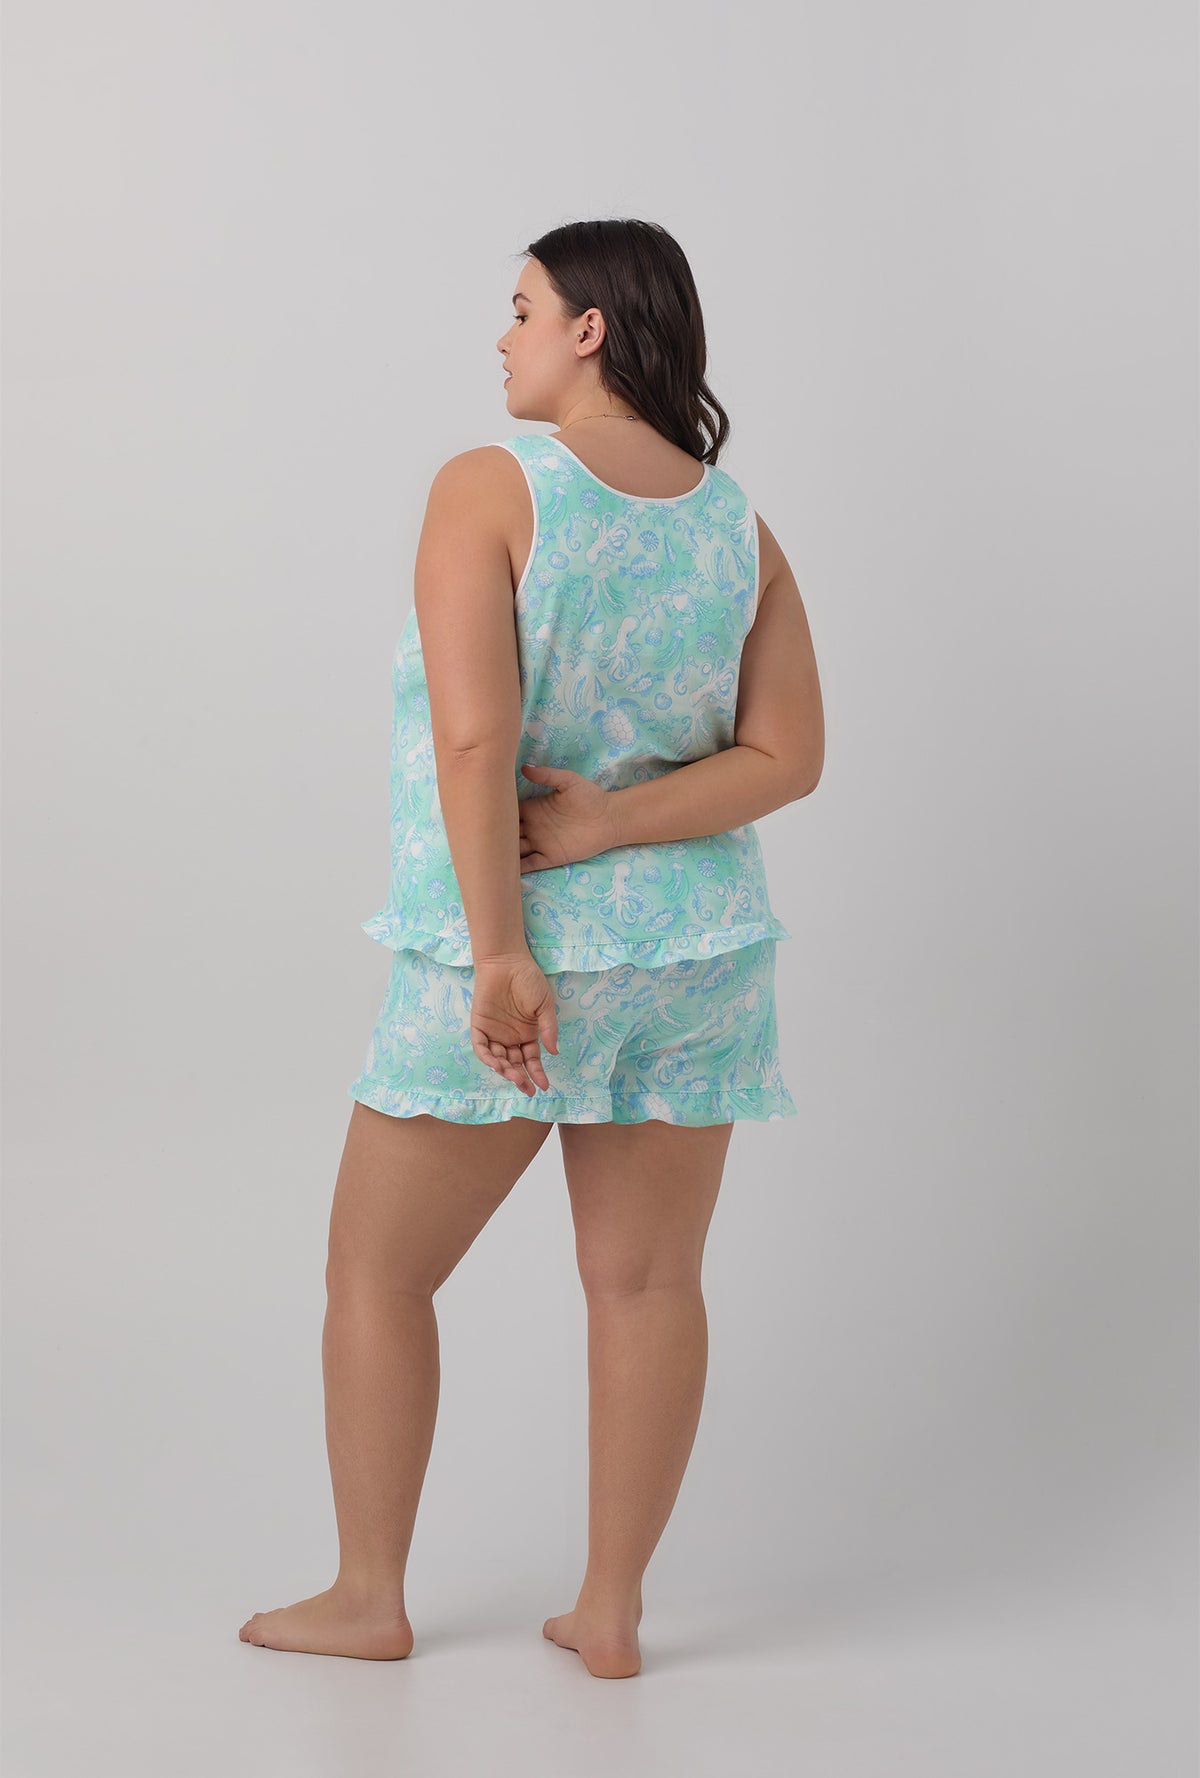 A lady wearing white ruffle tank and shorty plus size pj set with aquatic life print